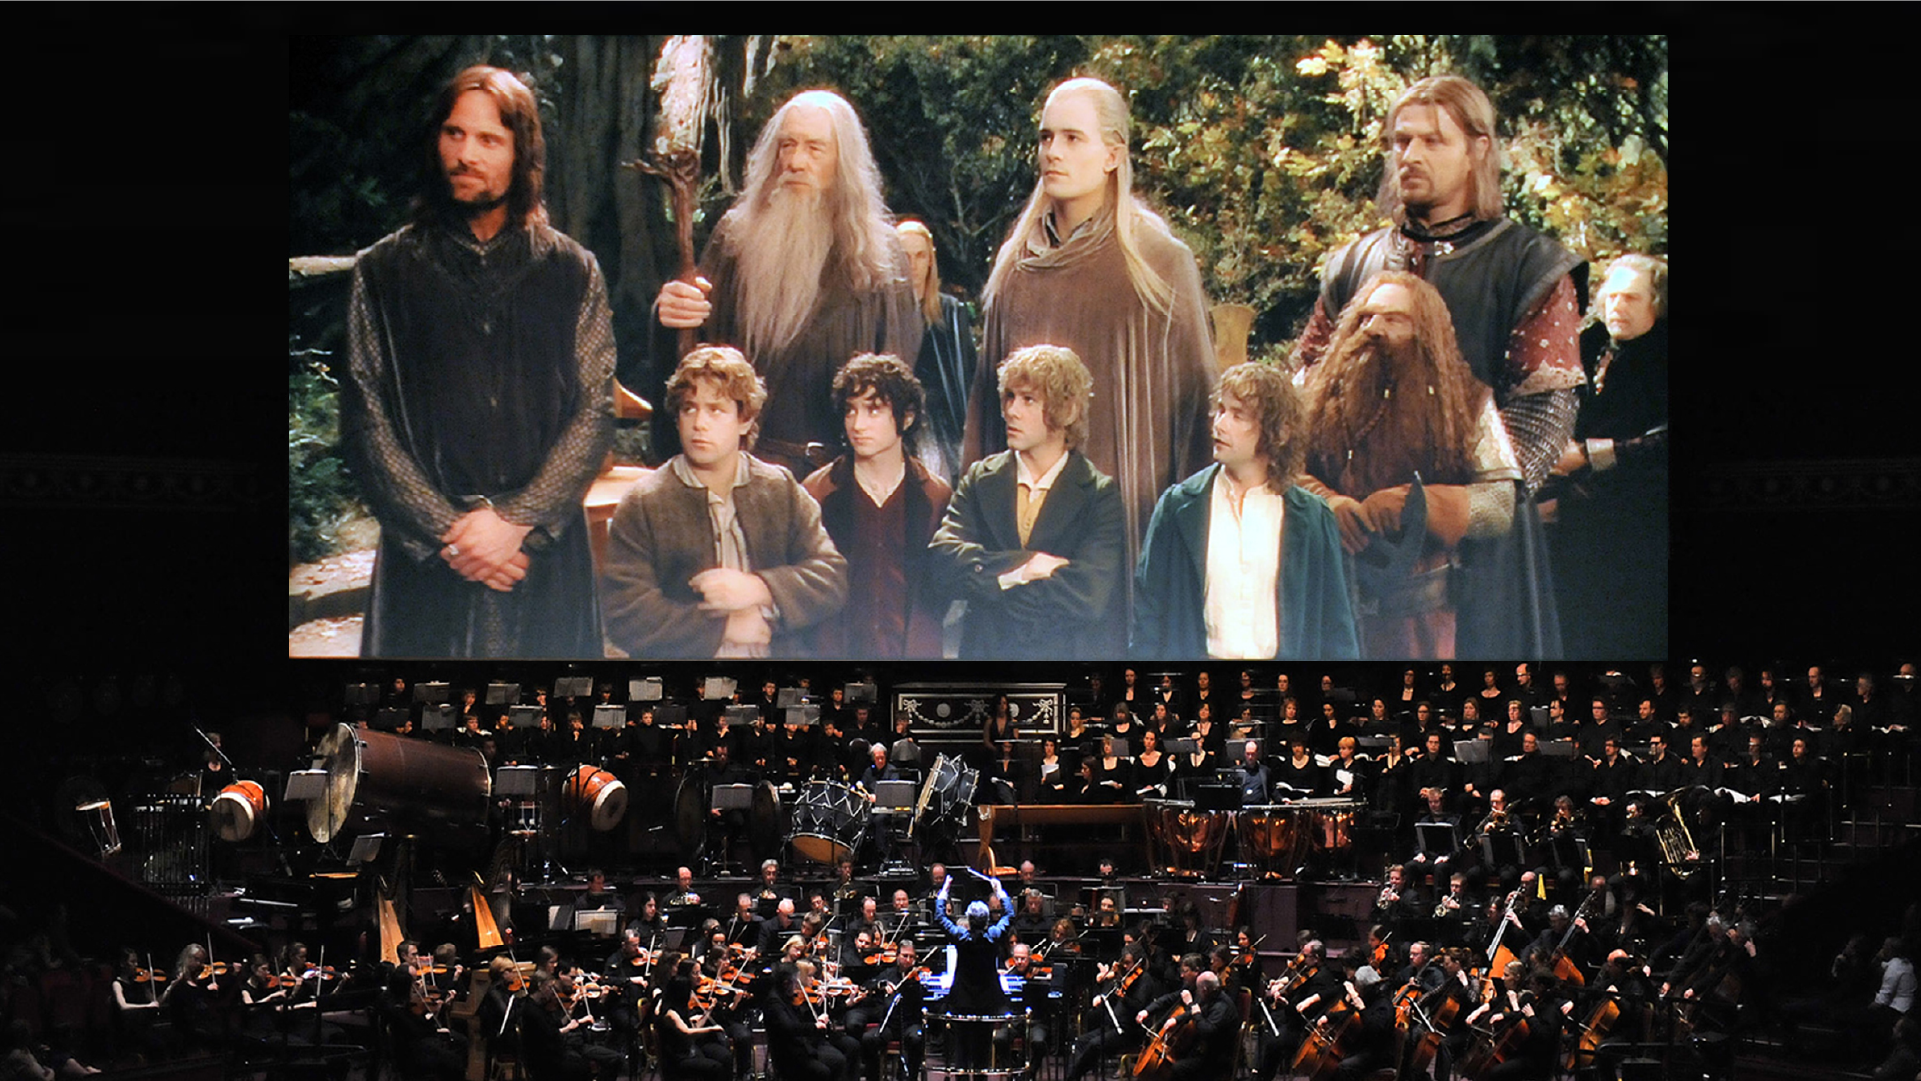 Lord Of The Rings January 18 at TD Place, Ottawa, ON